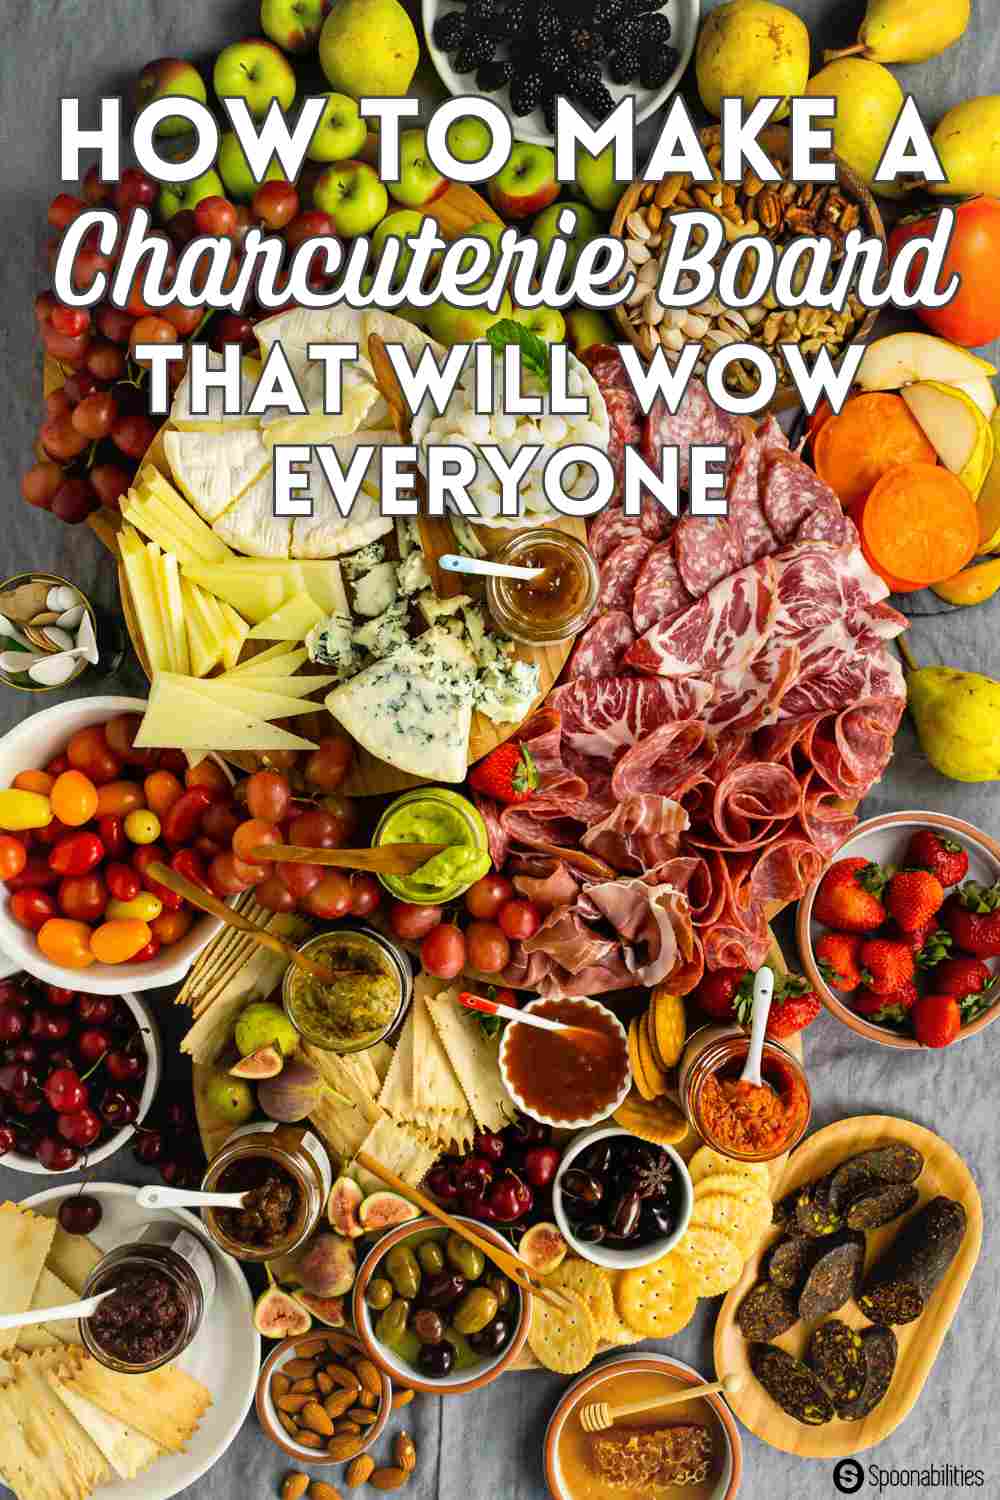 Fabulous Food Boards Kit: Simple & Inspiring Recipe Ideas to Share at Every  Gathering - Includes Guidebook, Serving Board, and Cheese Knives